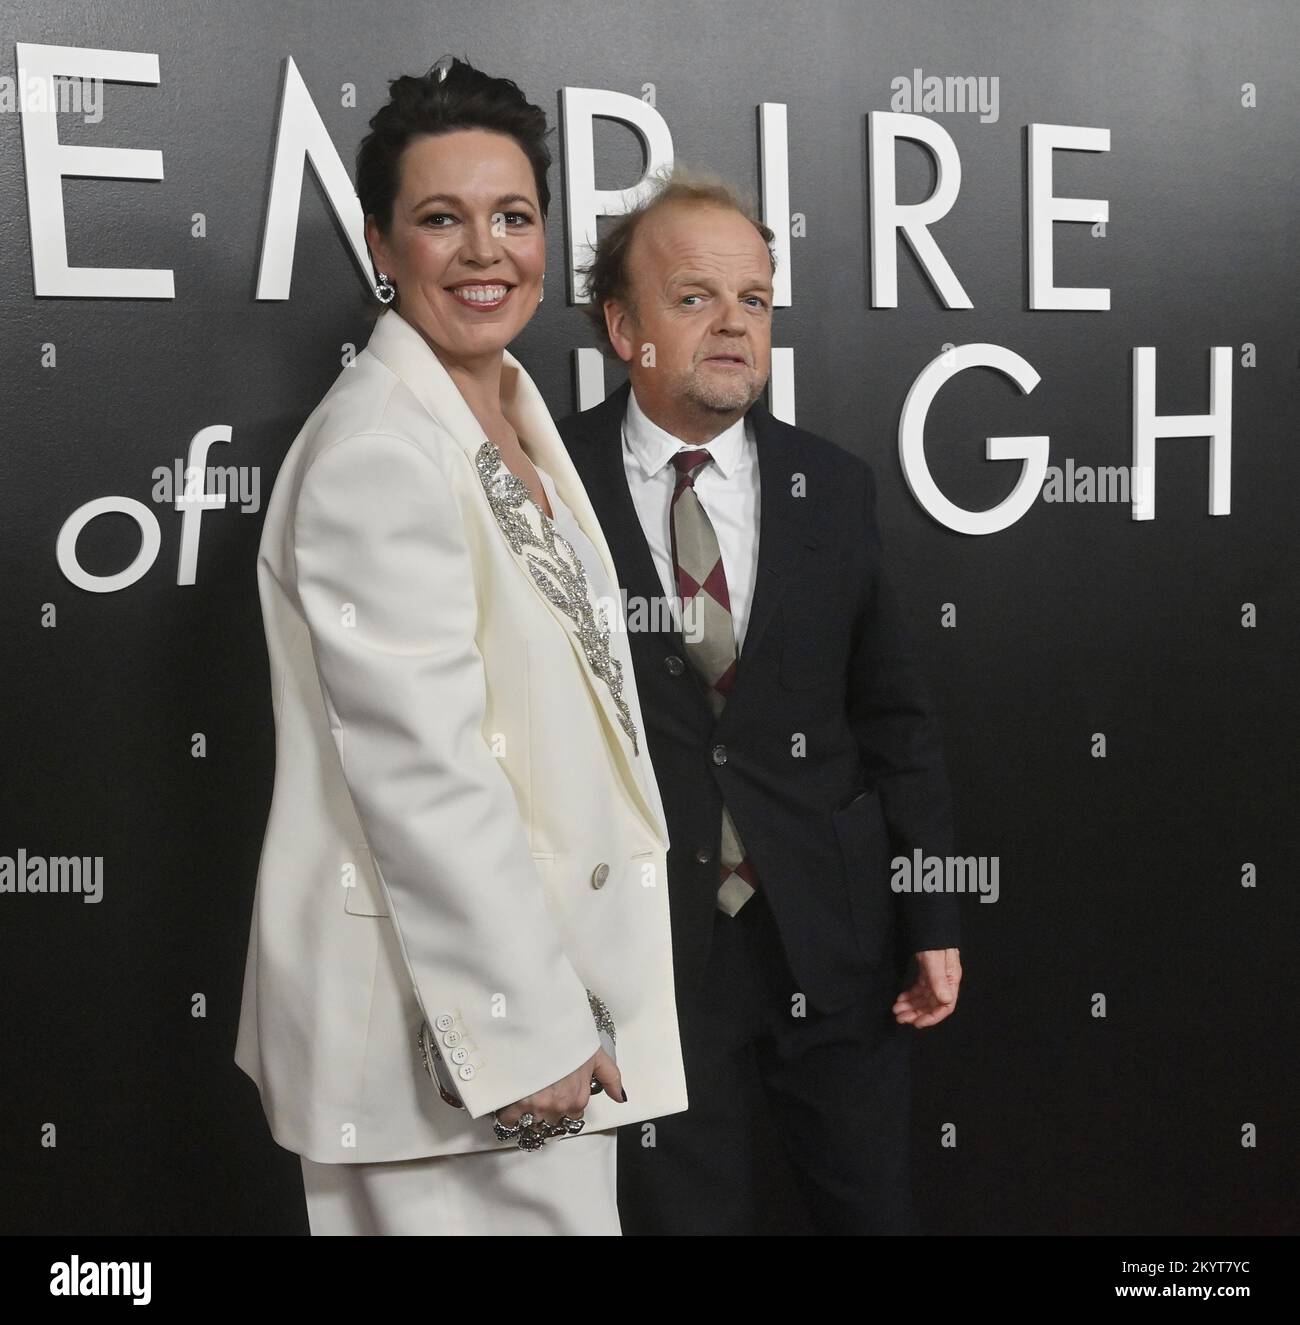 Cast members Olivia Colman (L) and Toby Jones attend the premiere of the motion picture romantic drama 'Empire of Light' at the Samuel Goldwyn Theater in Beverly Hills, California on Thursday, December 1, 2022. Storyline: Hilary (Olivia Colman) is a cinema manager struggling with her mental health, and Stephen (Micheal Ward) is a new employee longing to escape the provincial town where he faces daily adversity. Together they find a sense of belonging and experience the healing power of music, cinema, and community. Photo by Jim Ruymen/UPI Stock Photo